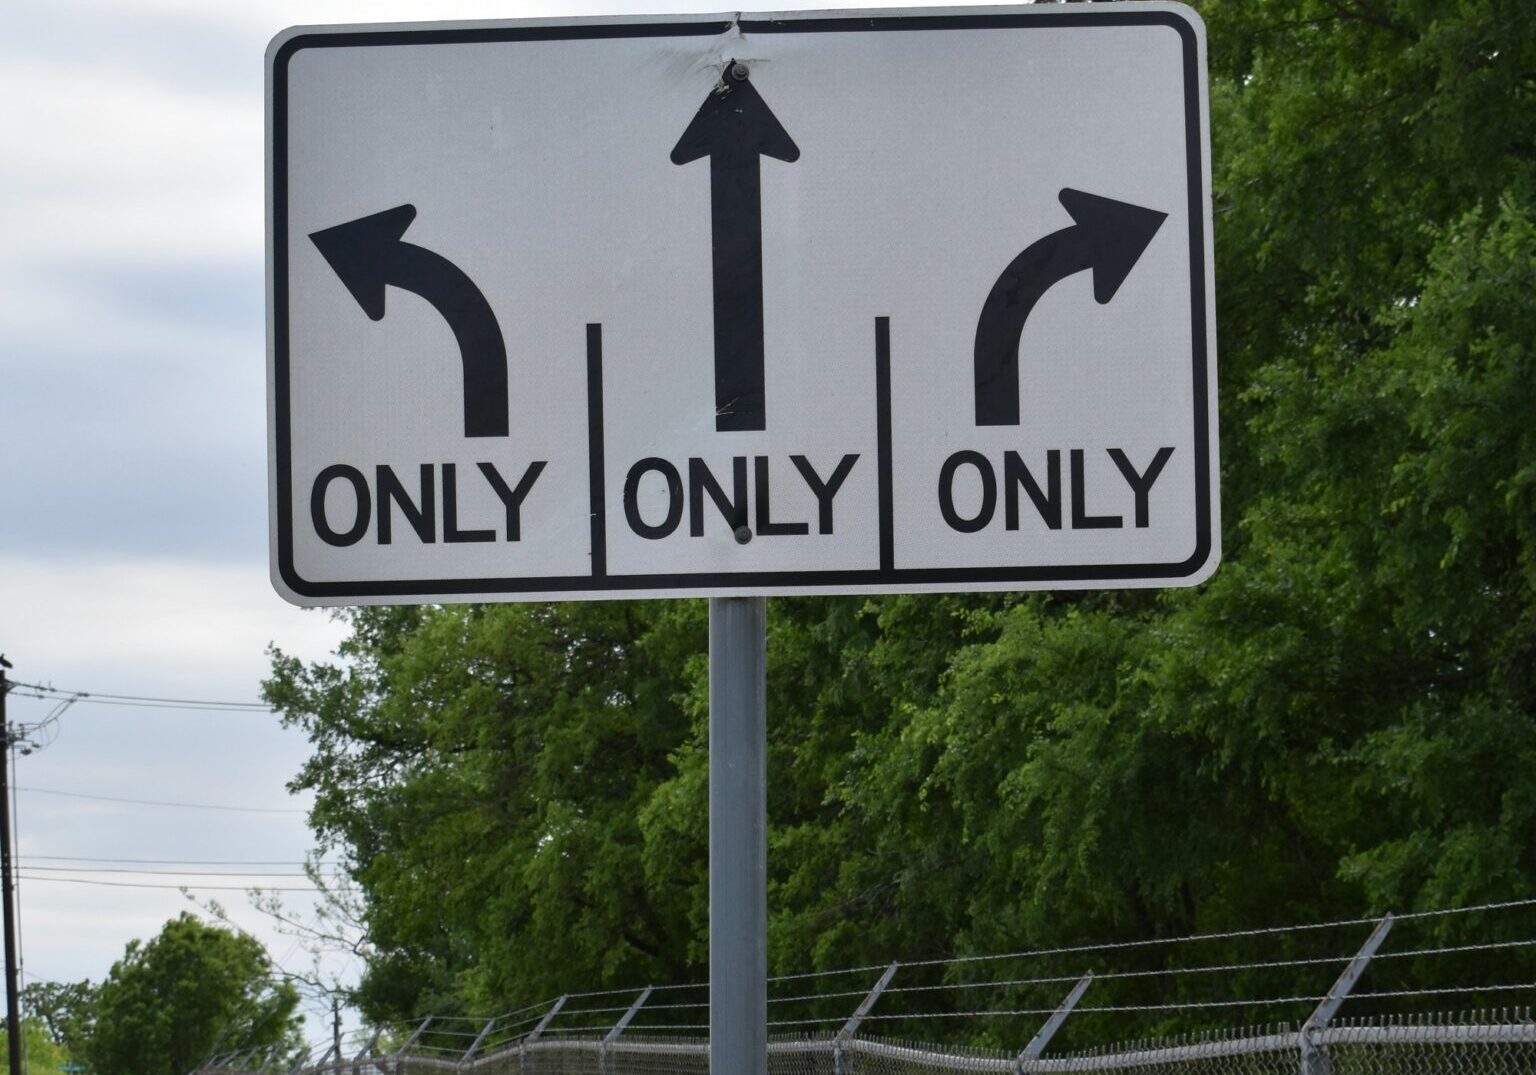 A roadsign showing arrows pointing in three different directions, each with the word only underneath it